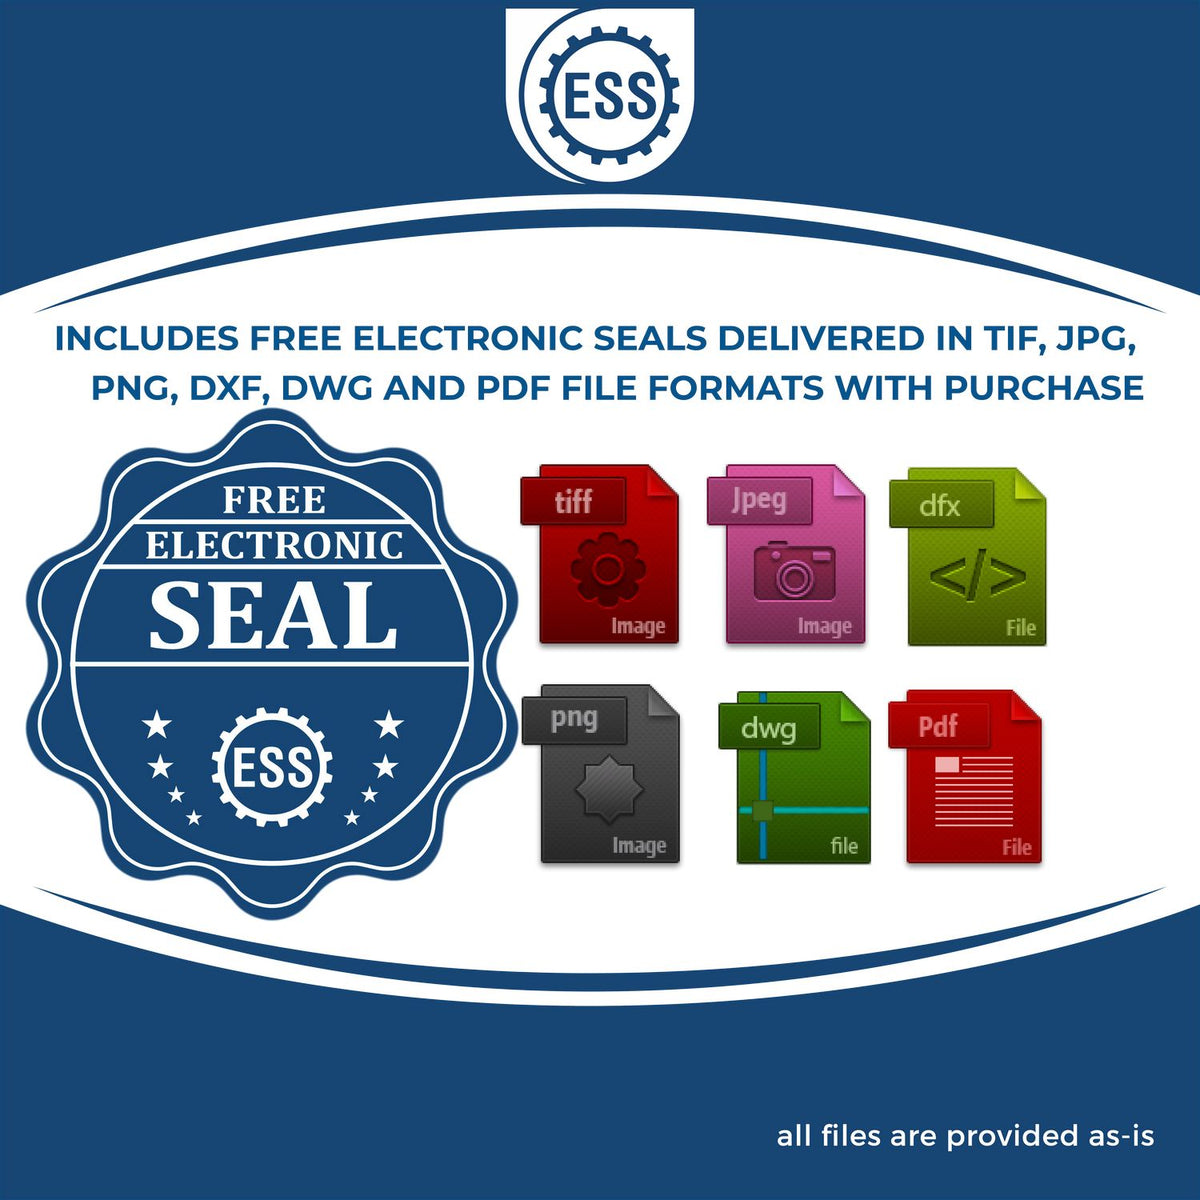 An infographic for the free electronic seal for the Hybrid Indiana Land Surveyor Seal illustrating the different file type icons such as DXF, DWG, TIF, JPG and PNG.